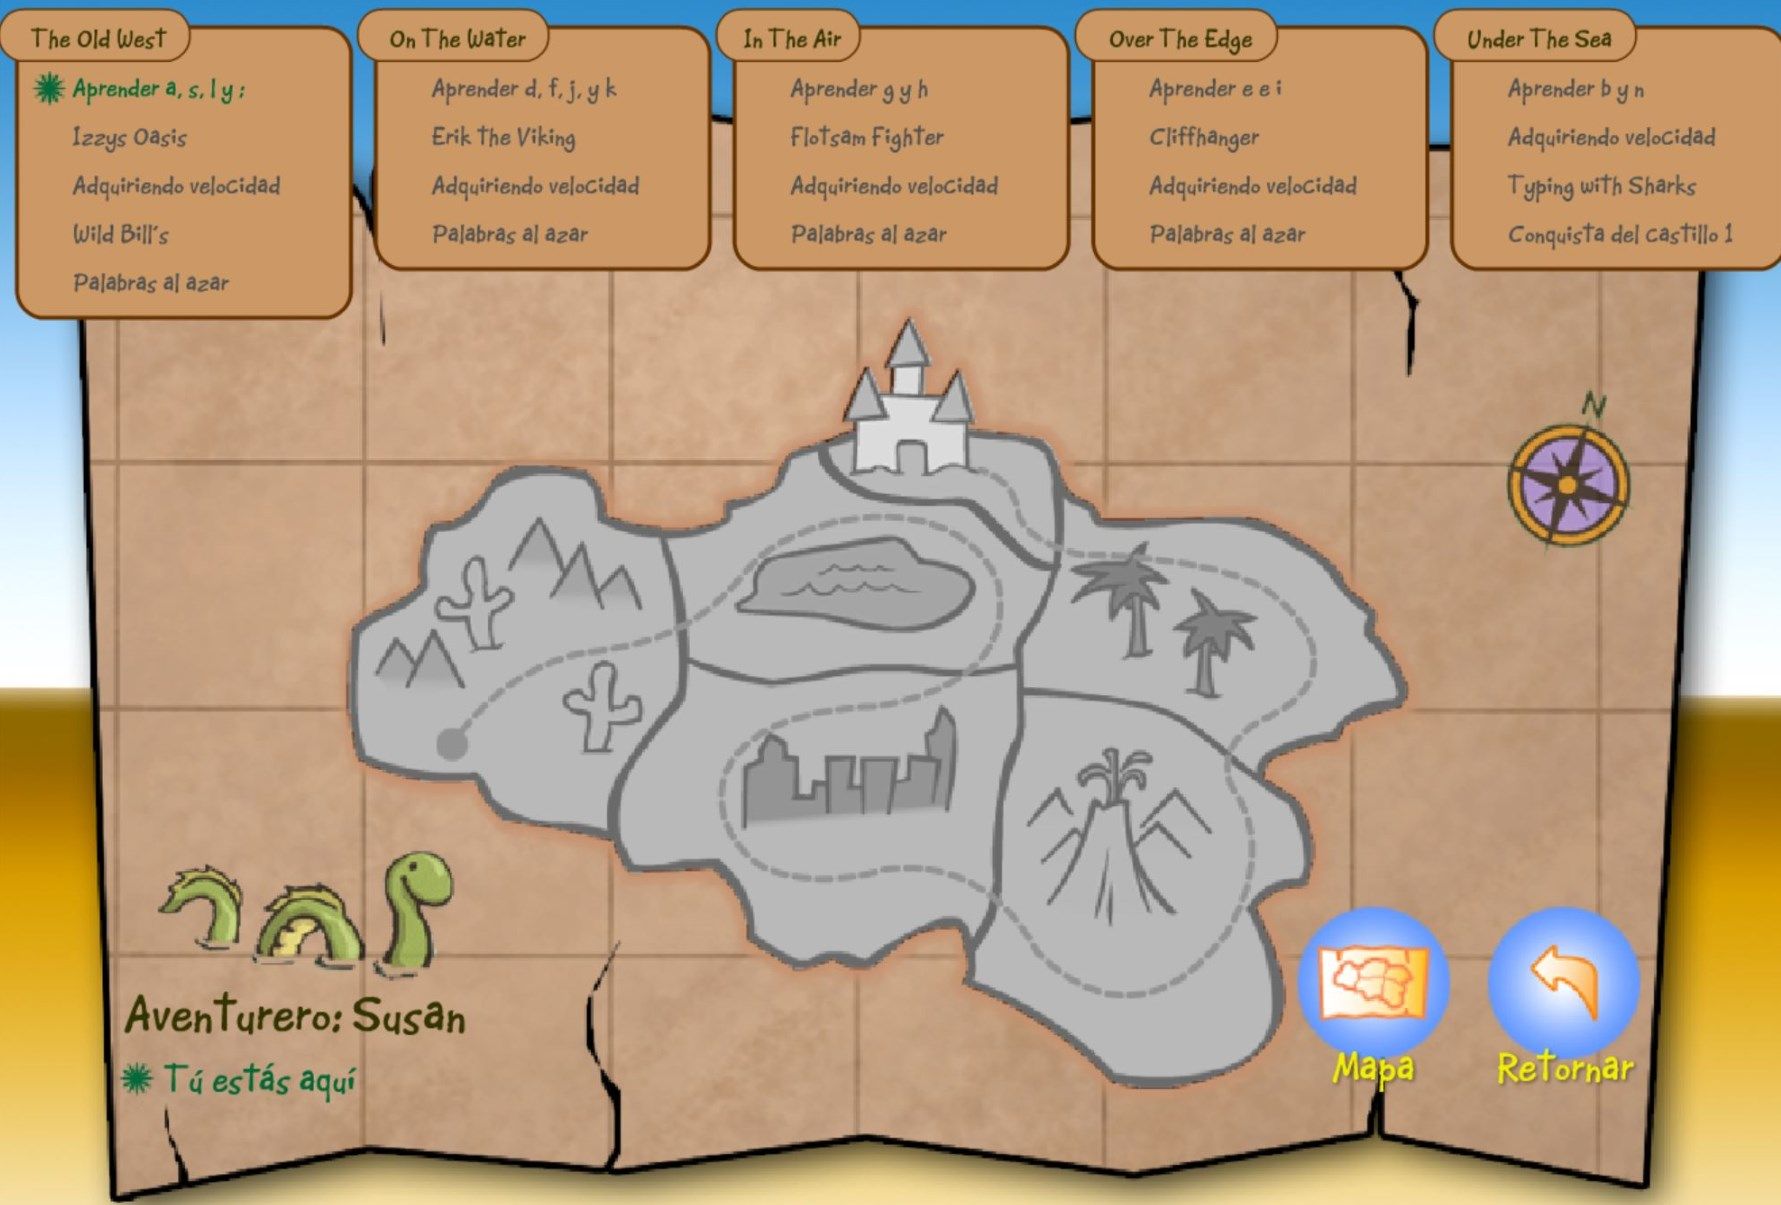 The Map Room helps kids see where they are on their Typer Island Adventure, where they are going next, and what keys they will learn